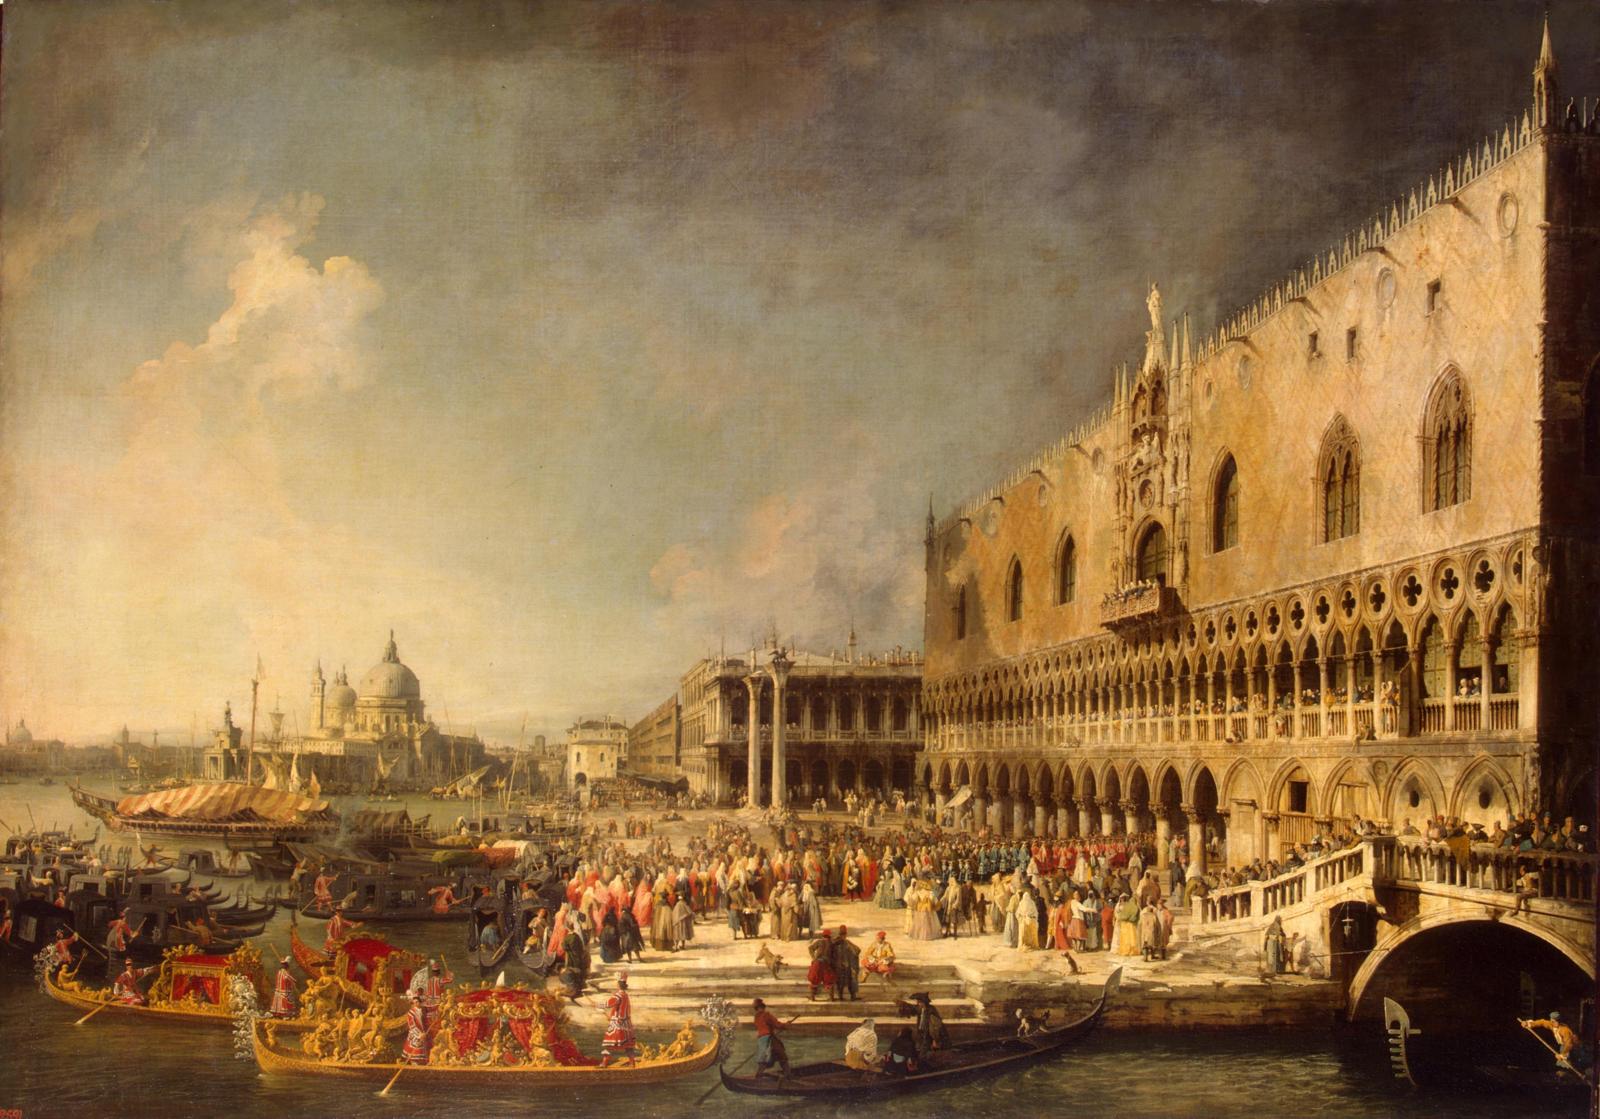 Arrival of the French Ambassador in Venice by Canaletto